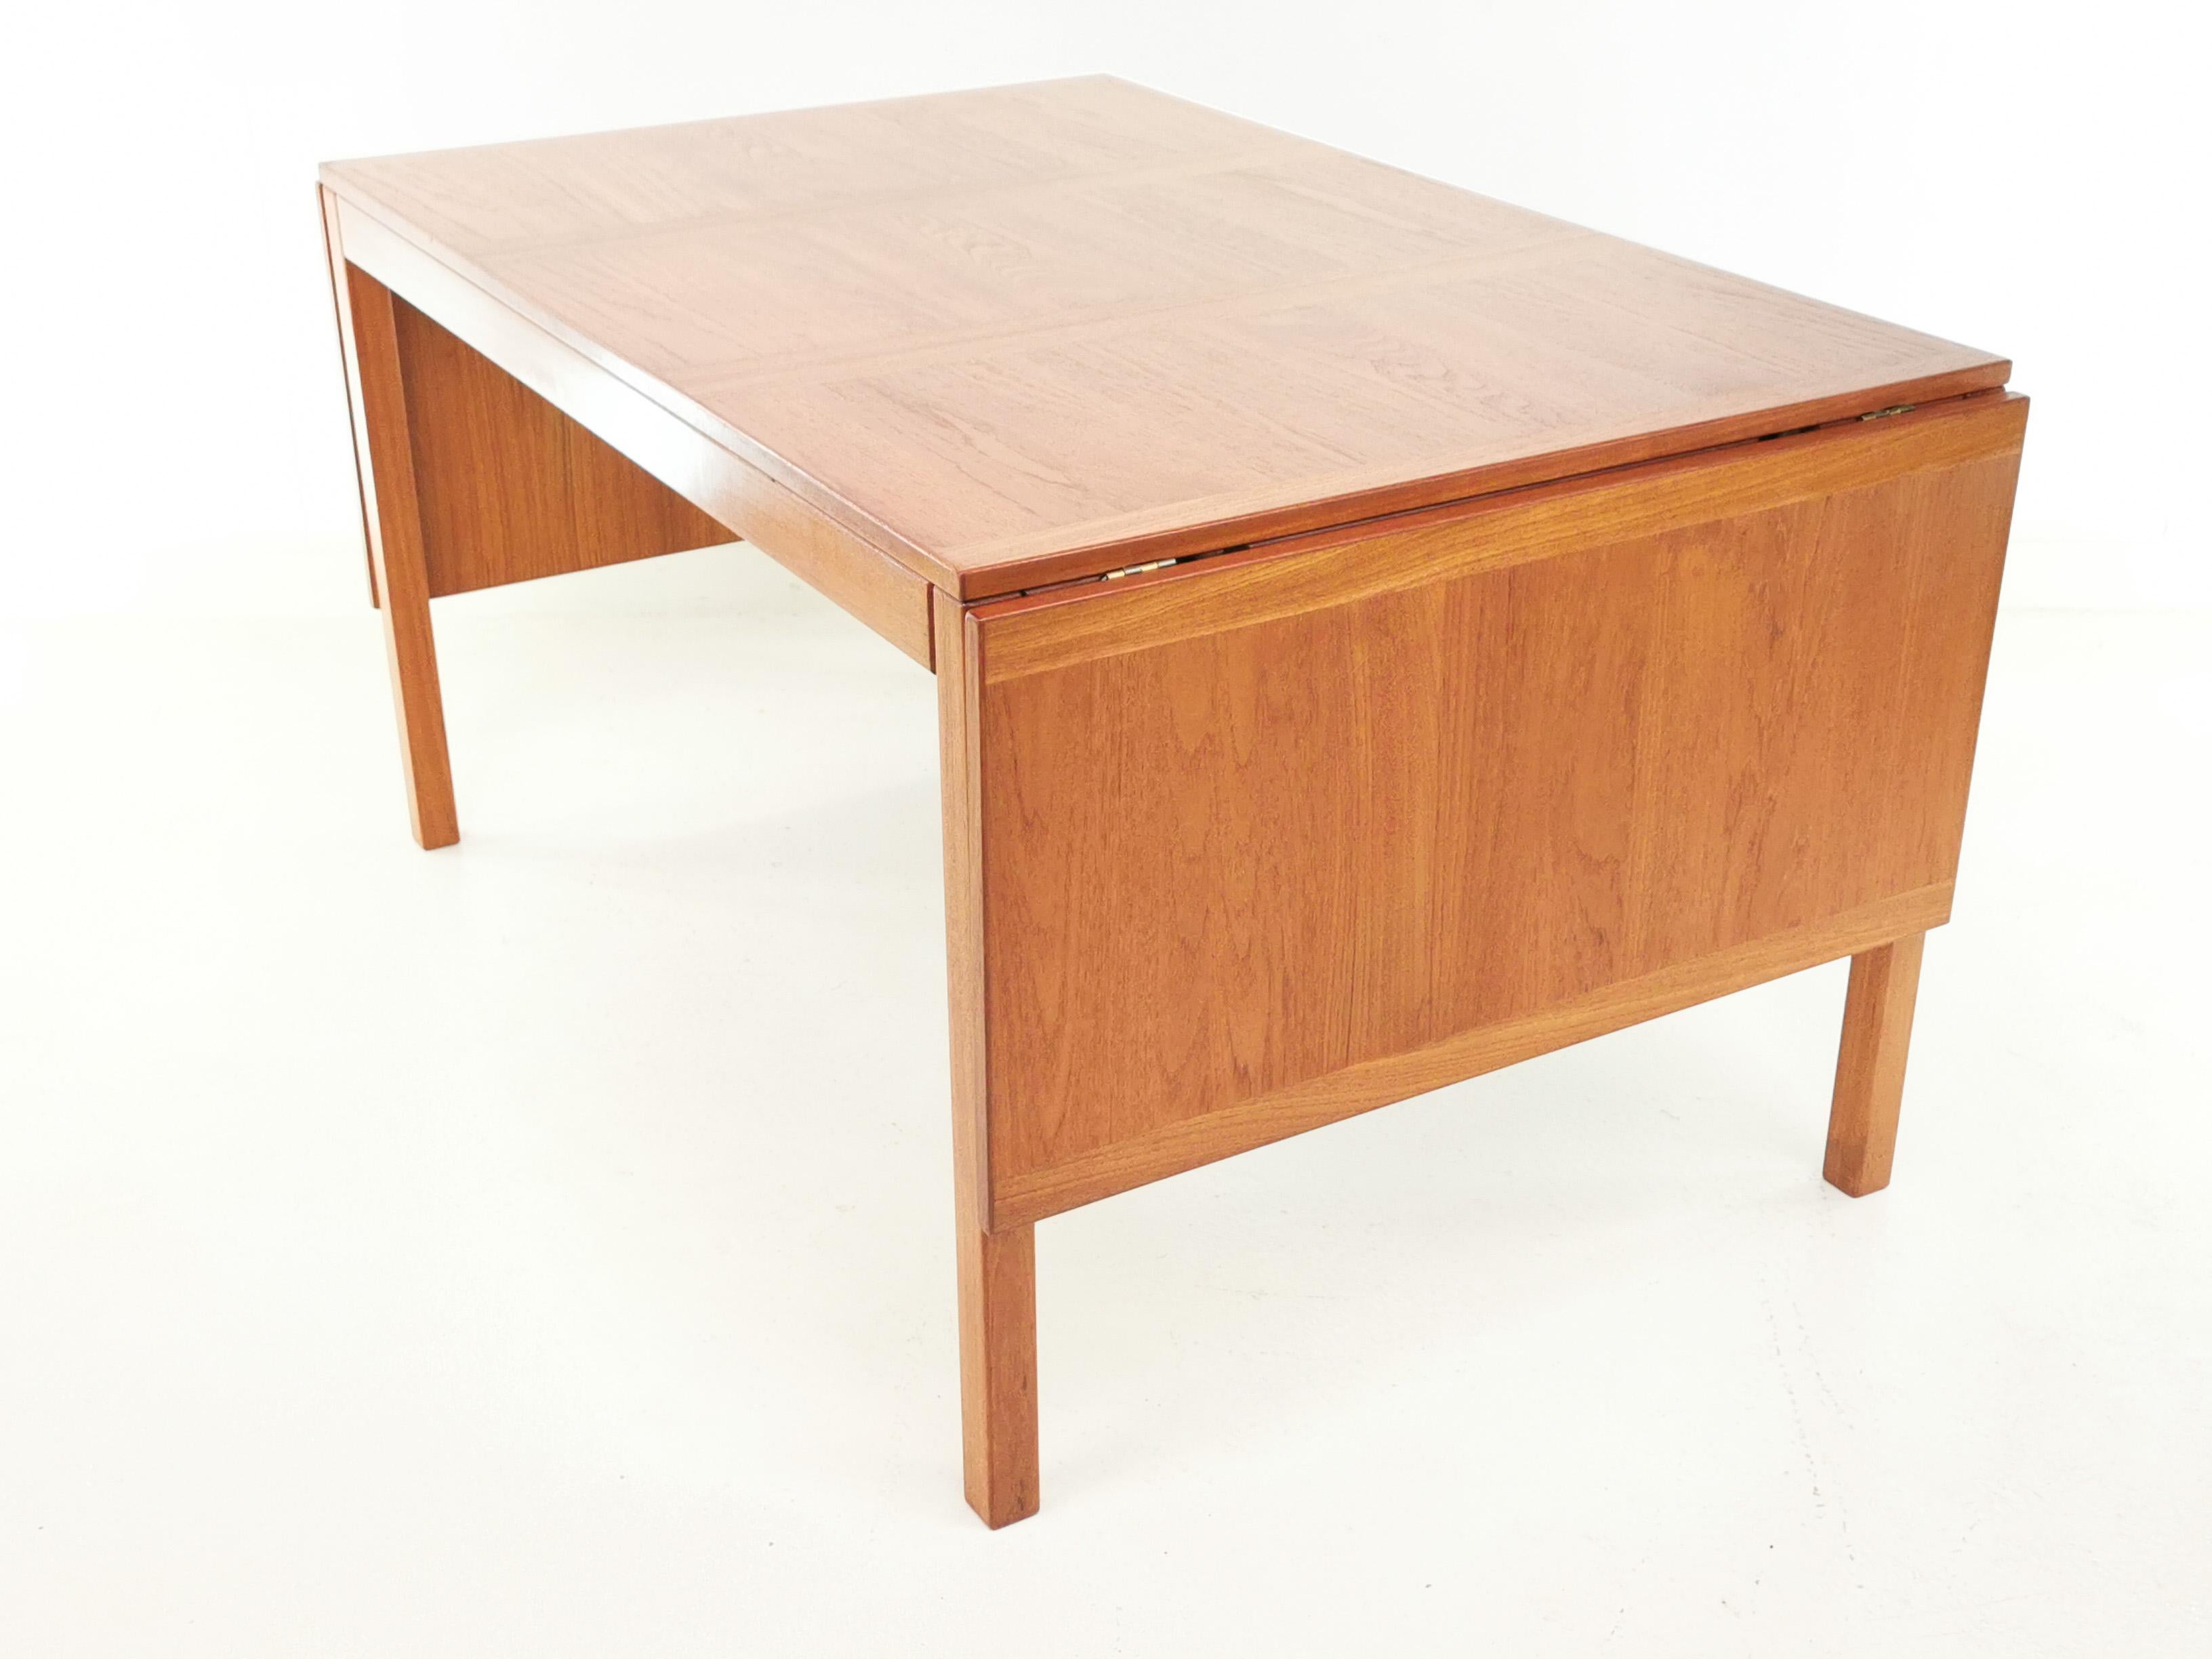 Danish teak extending dining table

Vejle Stole Mobelfabrik of Denmark 1970s dining table.

This mid-century modern teak drop leaf dining table has two removable leaves and can seat 8-10 people at its maximum size.

Made from teak. A sleek